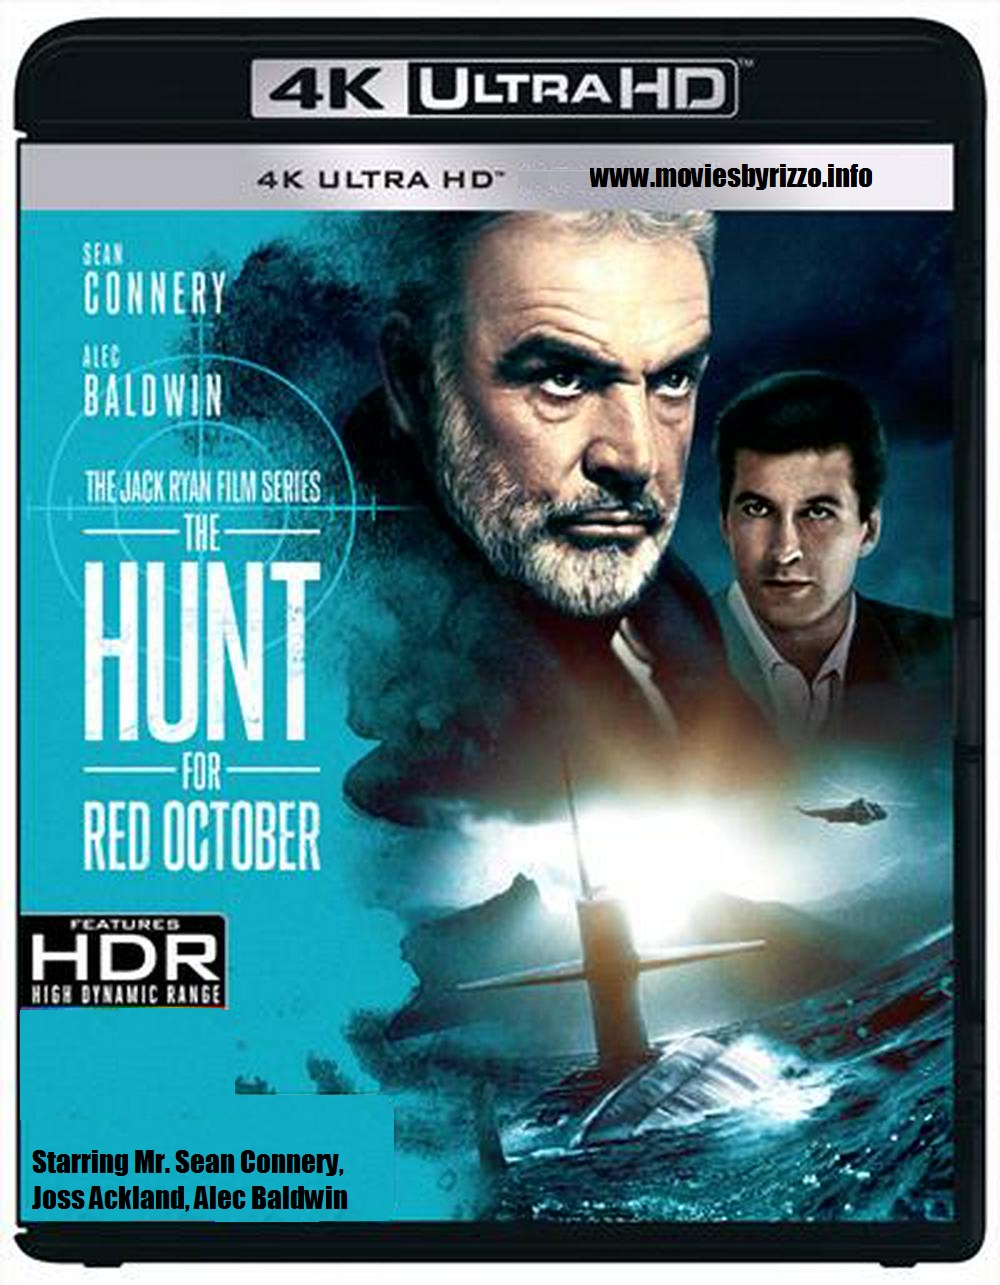 The Hunt for red october